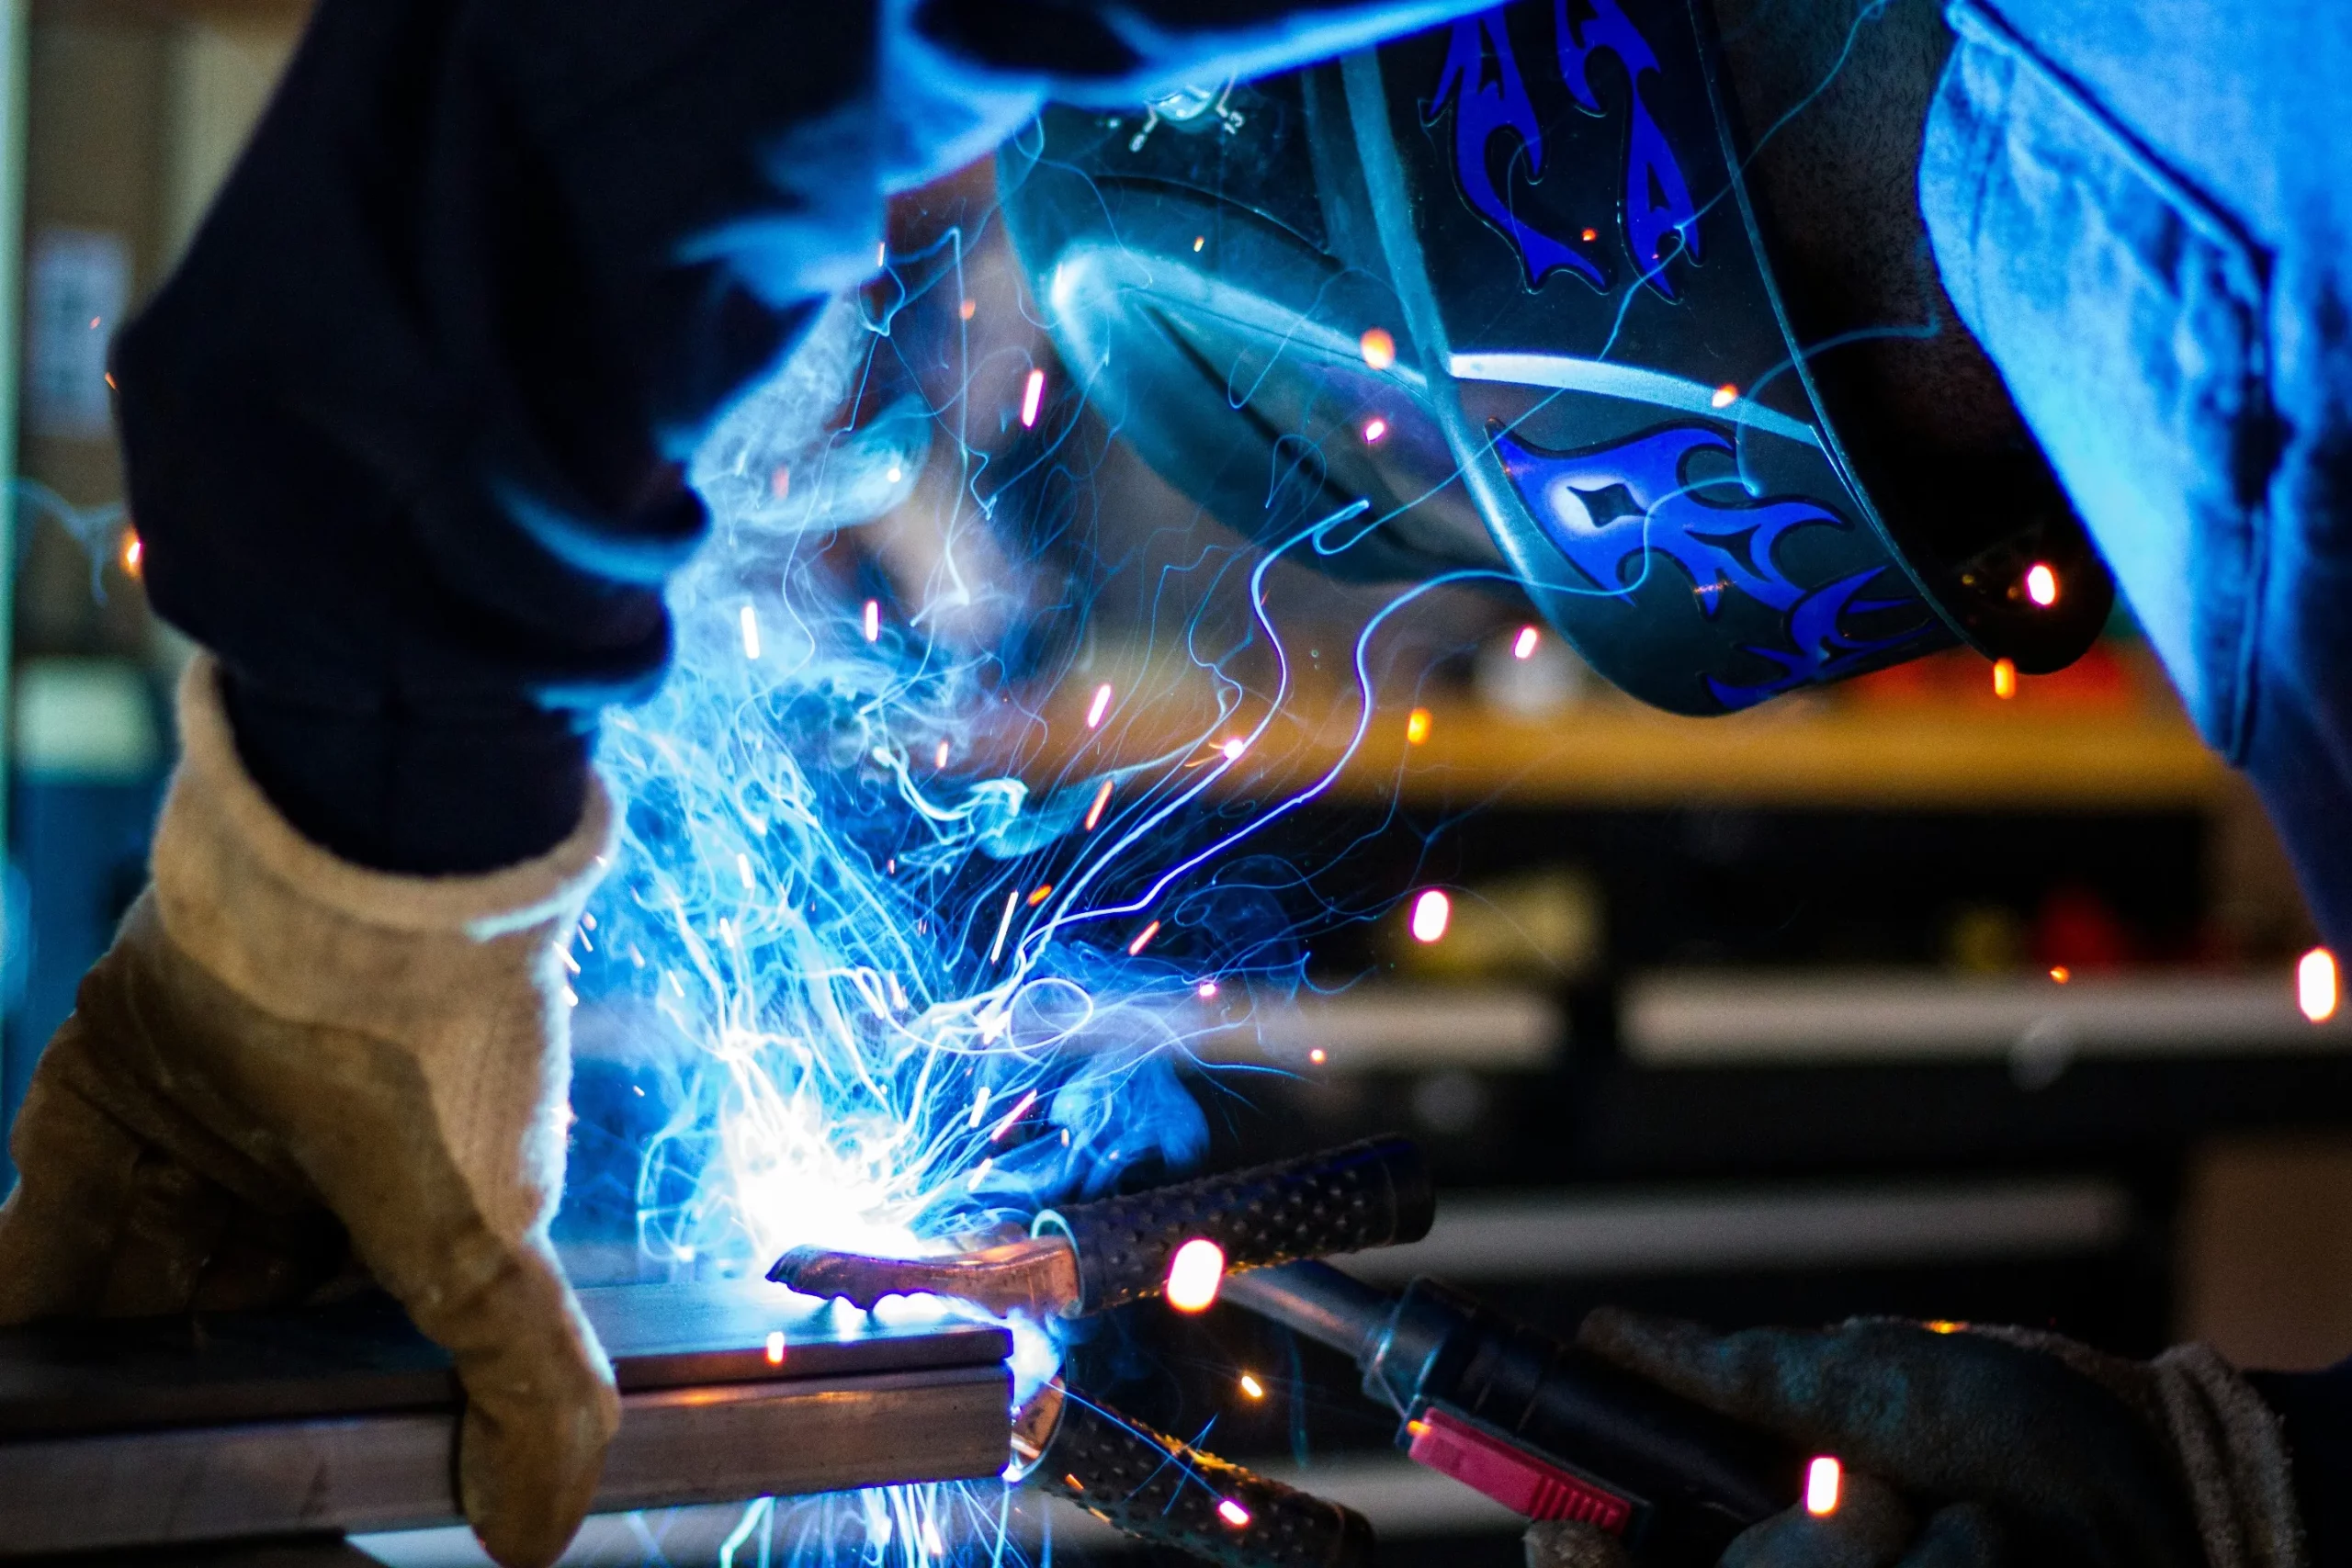 A welder wearing protective gear, including gloves and a welding helmet with blue flame designs, uses a torch to weld a piece of metal. Bright sparks and blue light emanate from the welding process, creating a dynamic and intense scene.